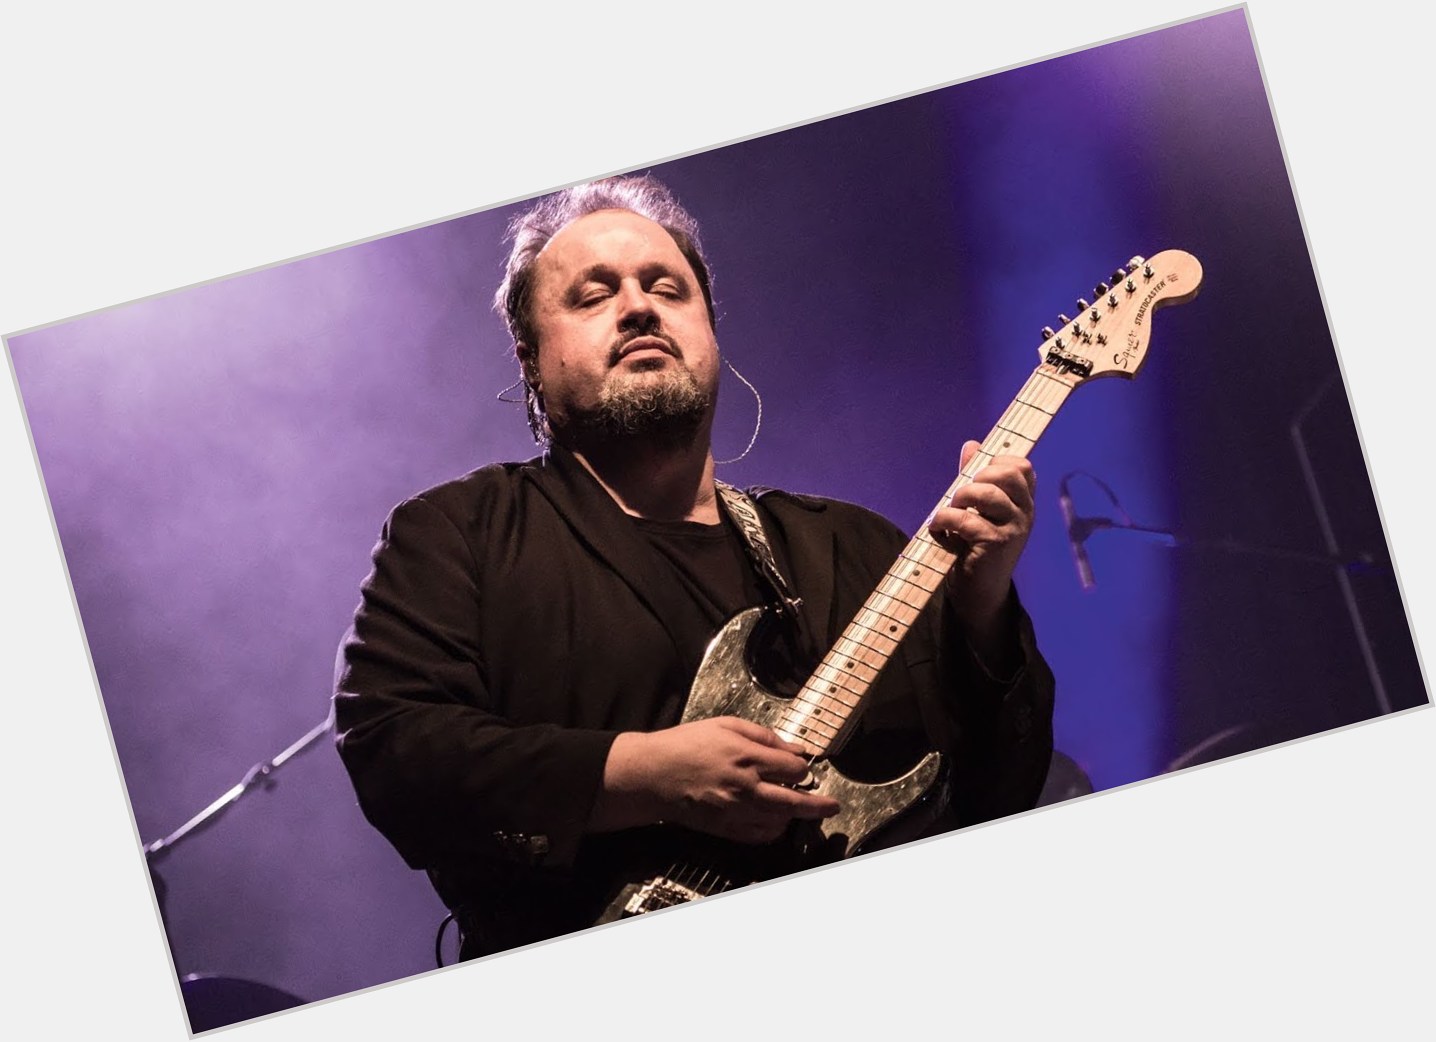 Steve Rothery dating 2